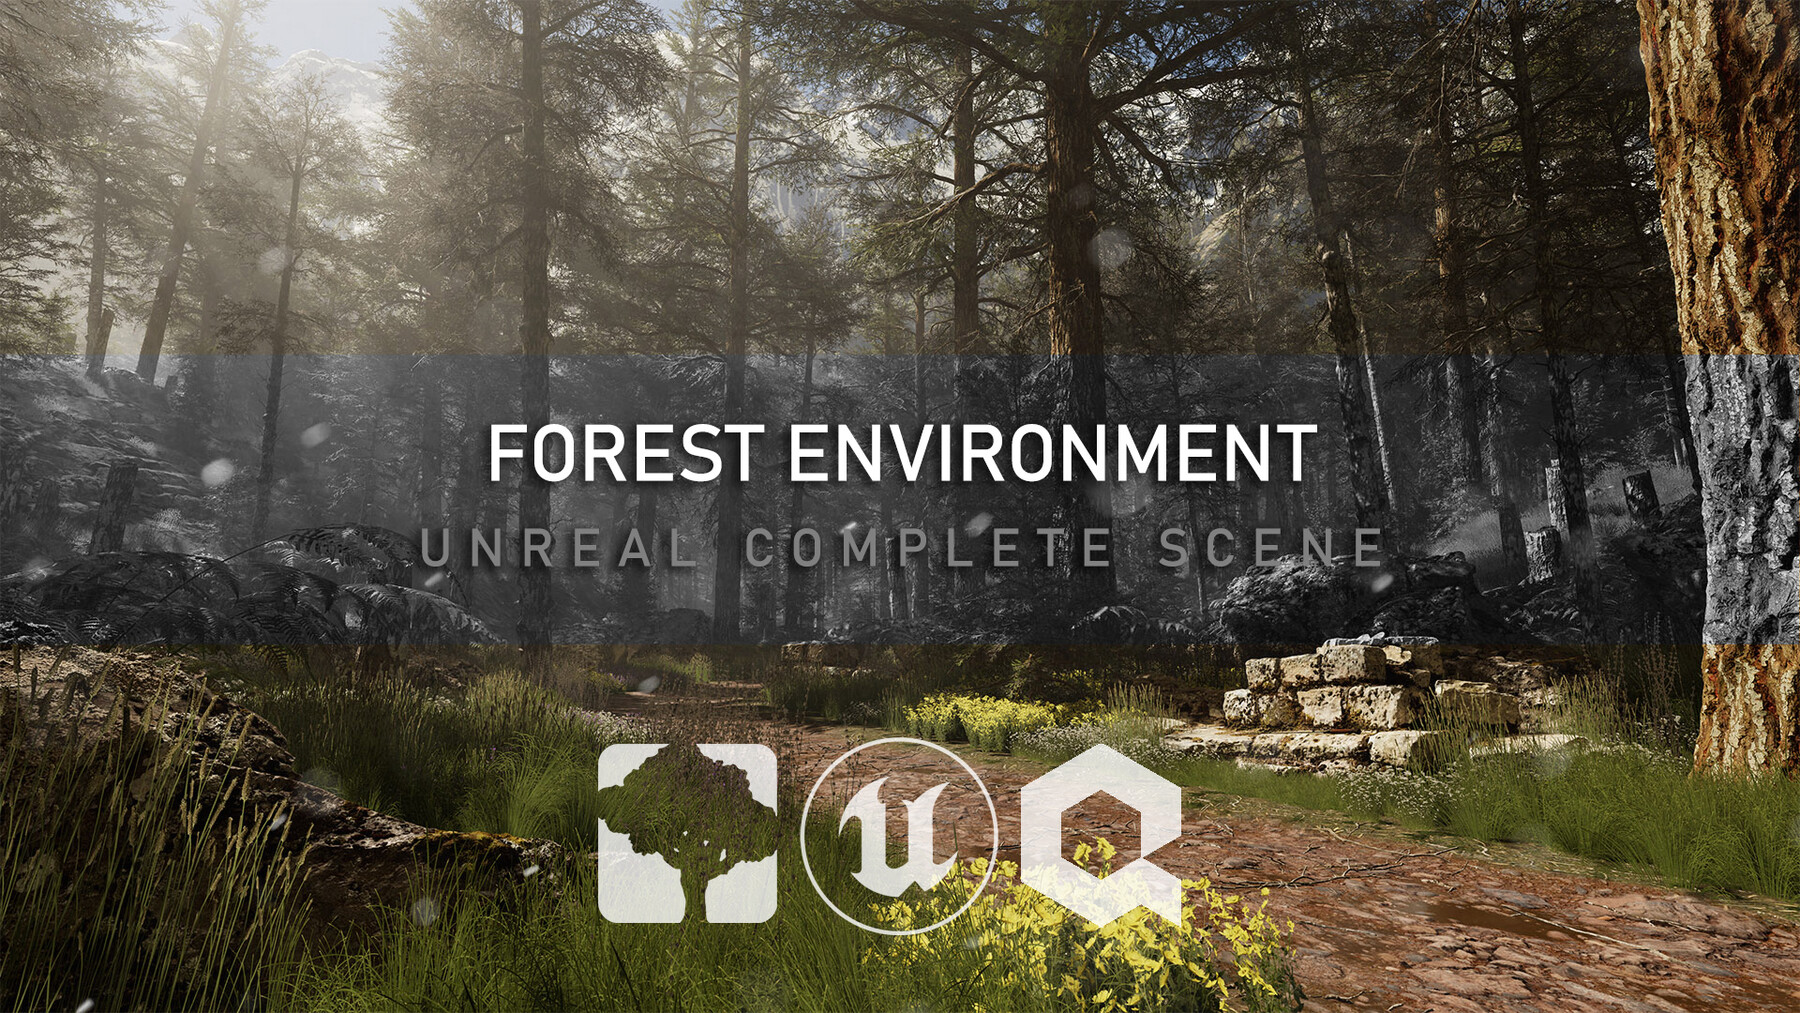 Ultimate Forest Environment Course - In-Depth Tutorial